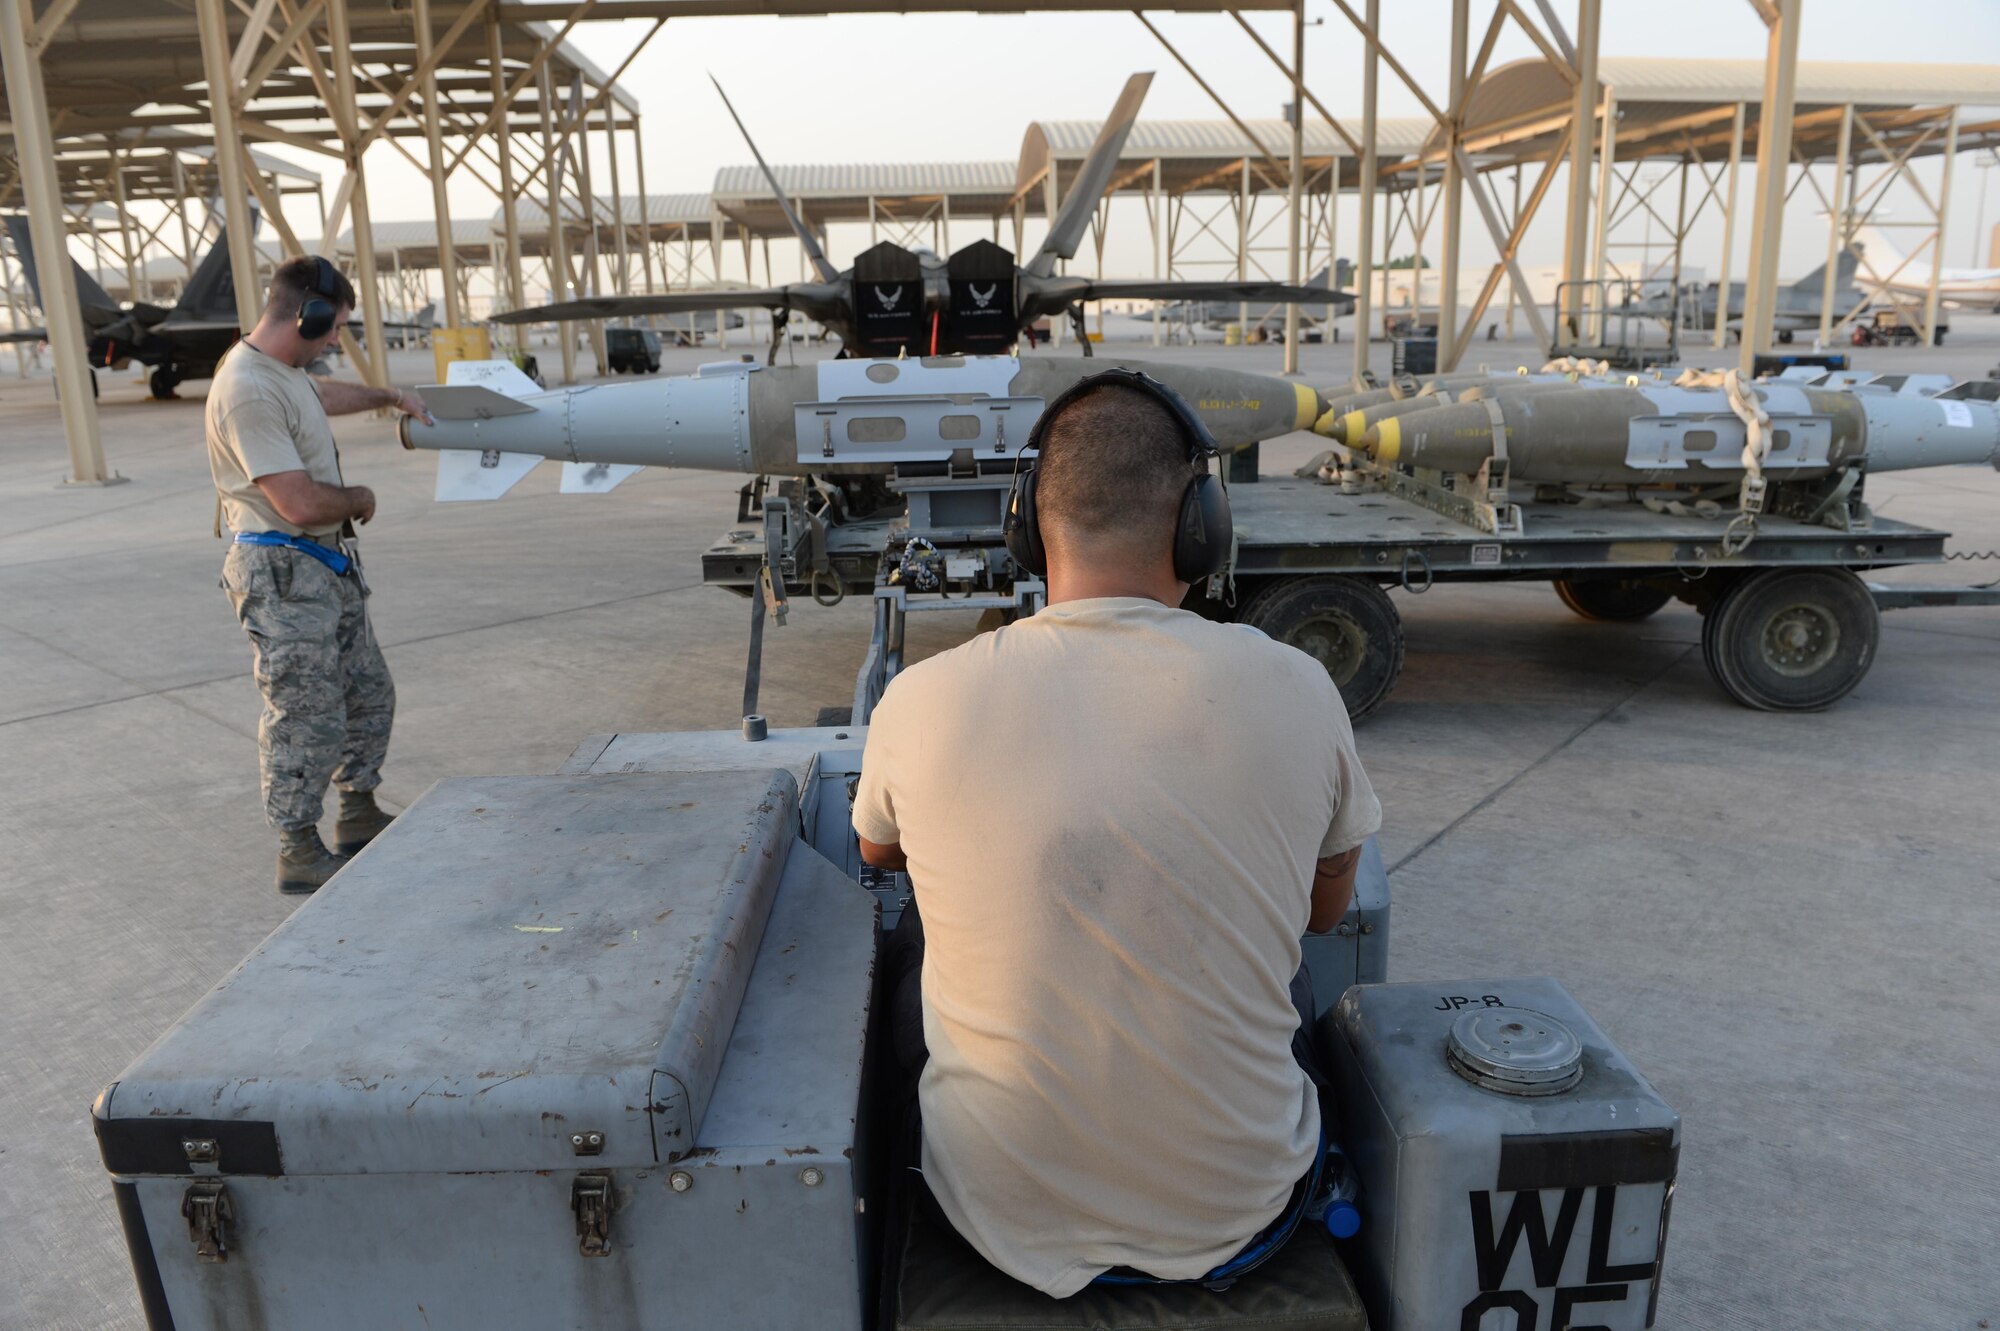 380th Expeditionary Maintenance Airmen prepare to load munitions on an F-22 Raptor at an undisclosed location in Southwest Asia, August 30, 2015. The F-22’s combination of sensor capability, integrated avionics, situational awareness, and weapons provides first-kill opportunity against threats. (U.S. Air Force photo illustration/ Staff Sgt. Sandra Welch)